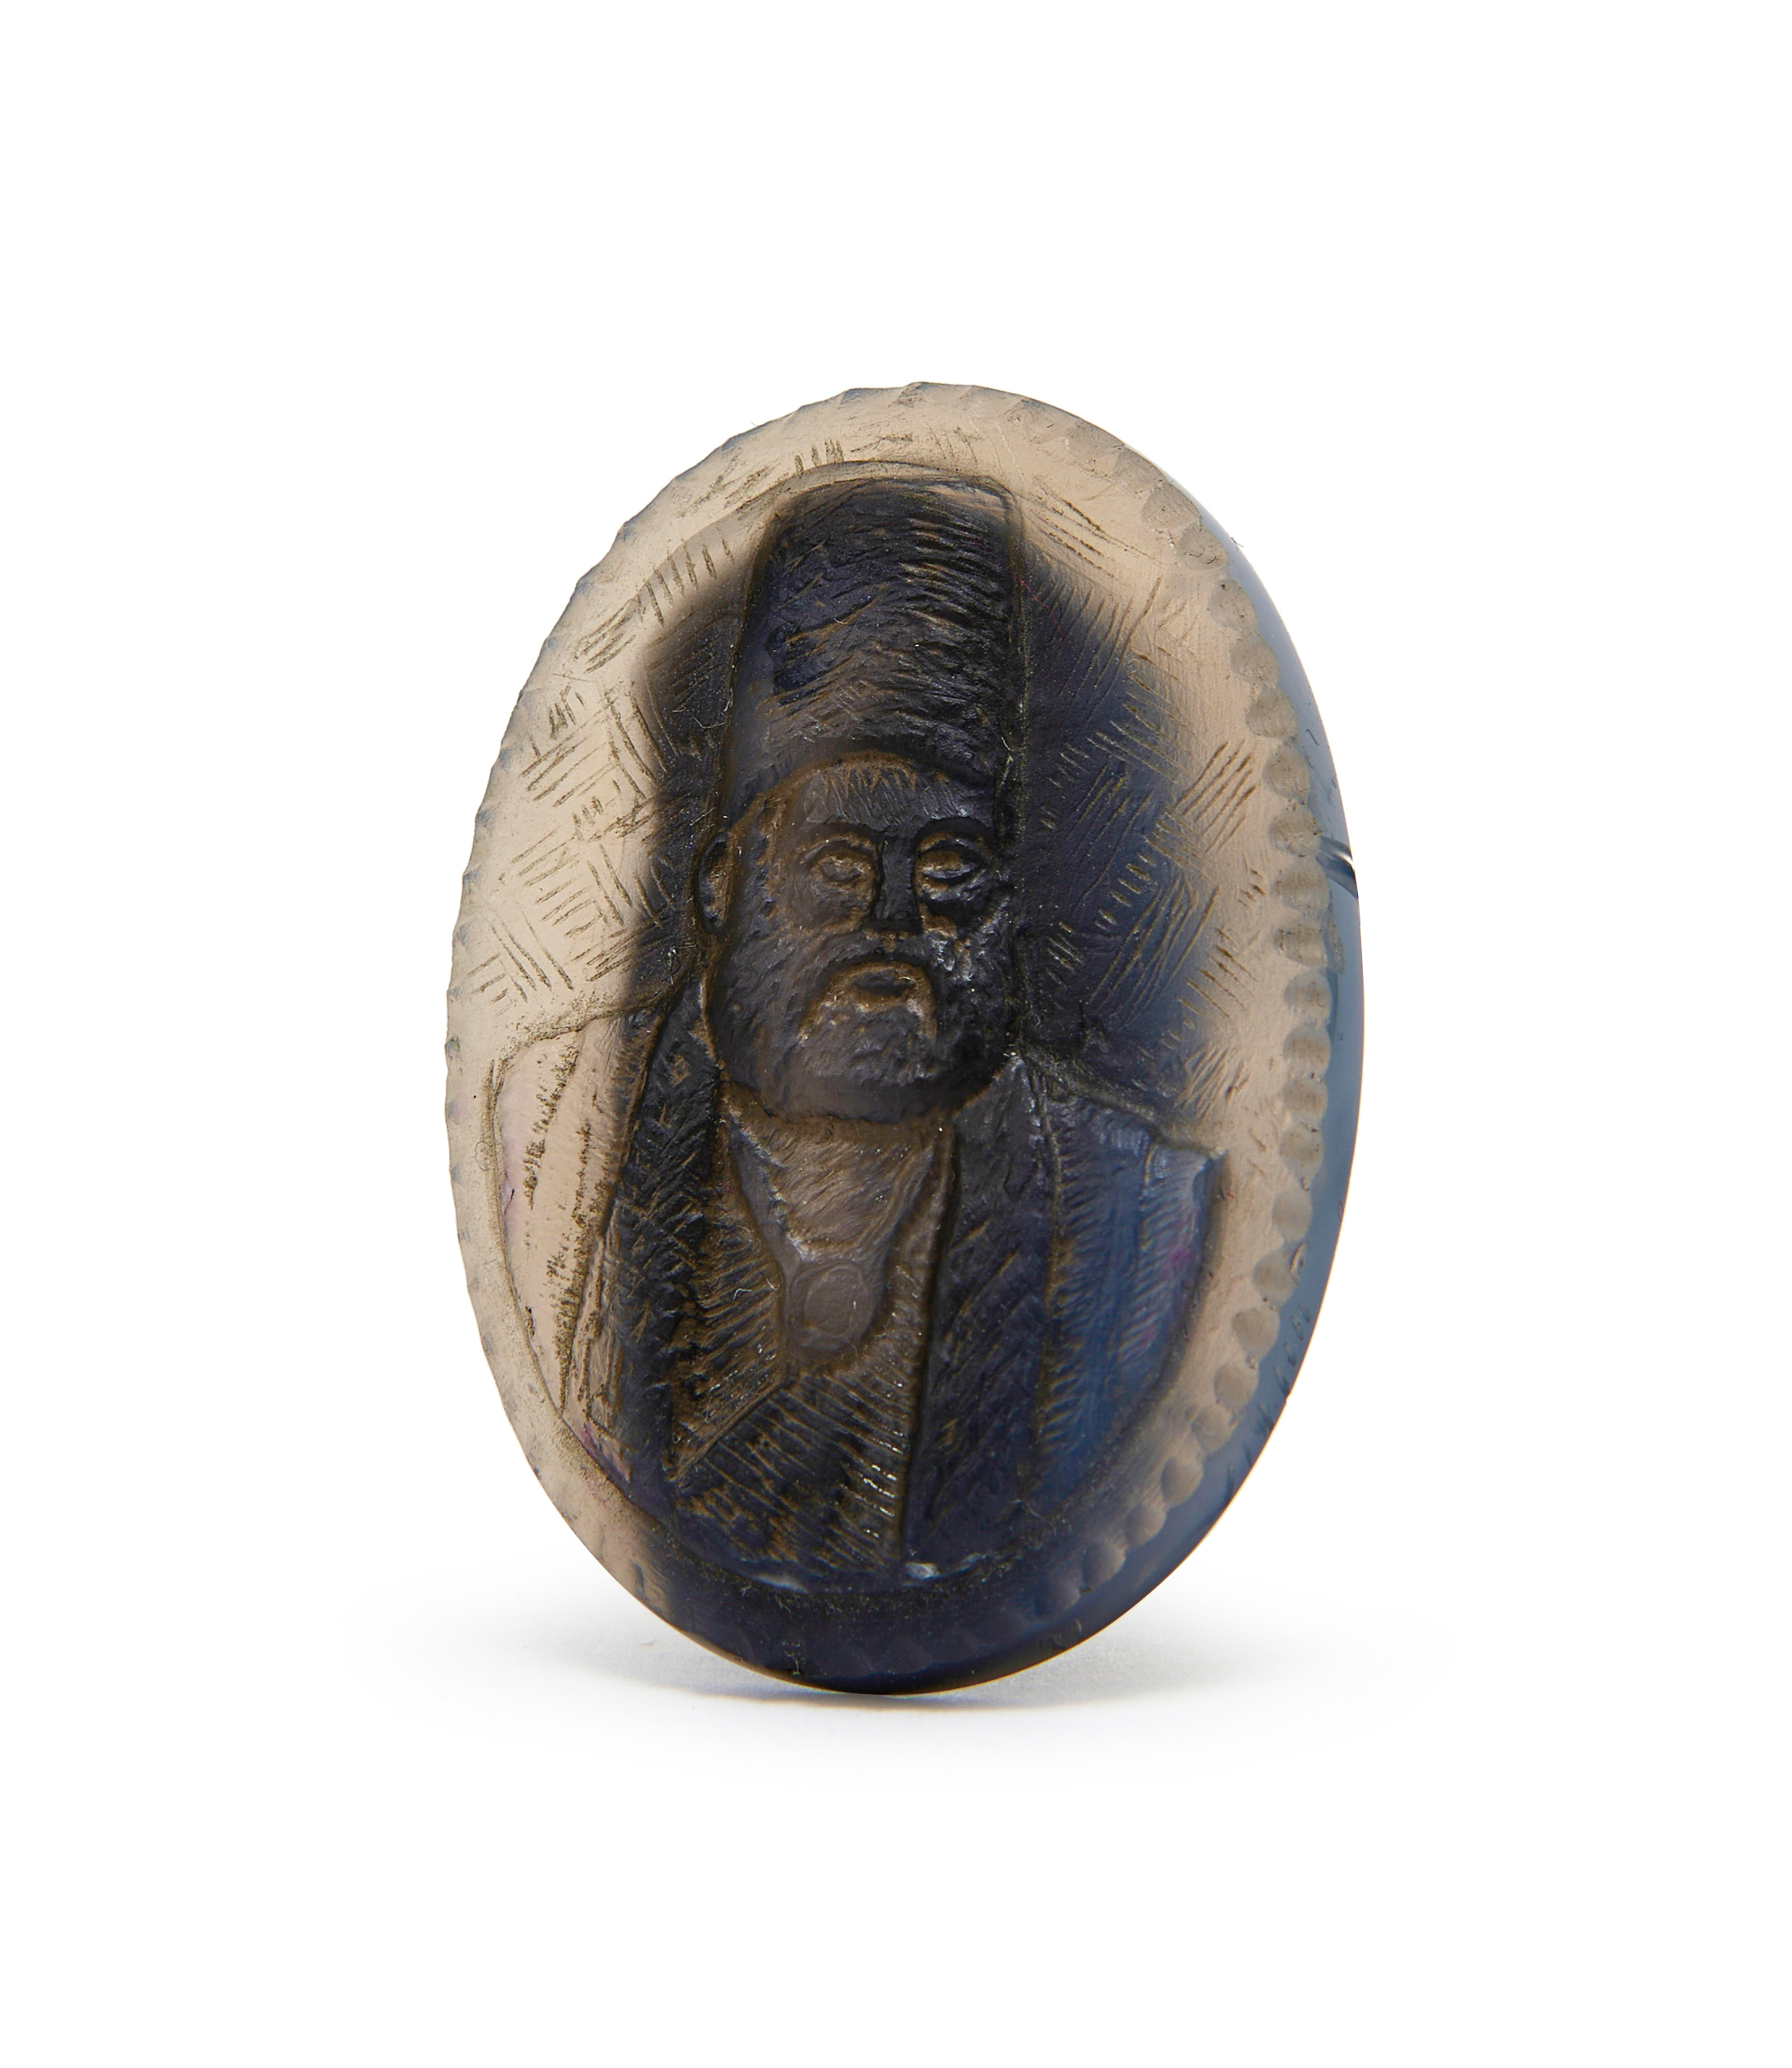 AN AGATE AMULET DEPICTING MINISTER AMIR KABIR, 19TH CENTURY, PERSIA